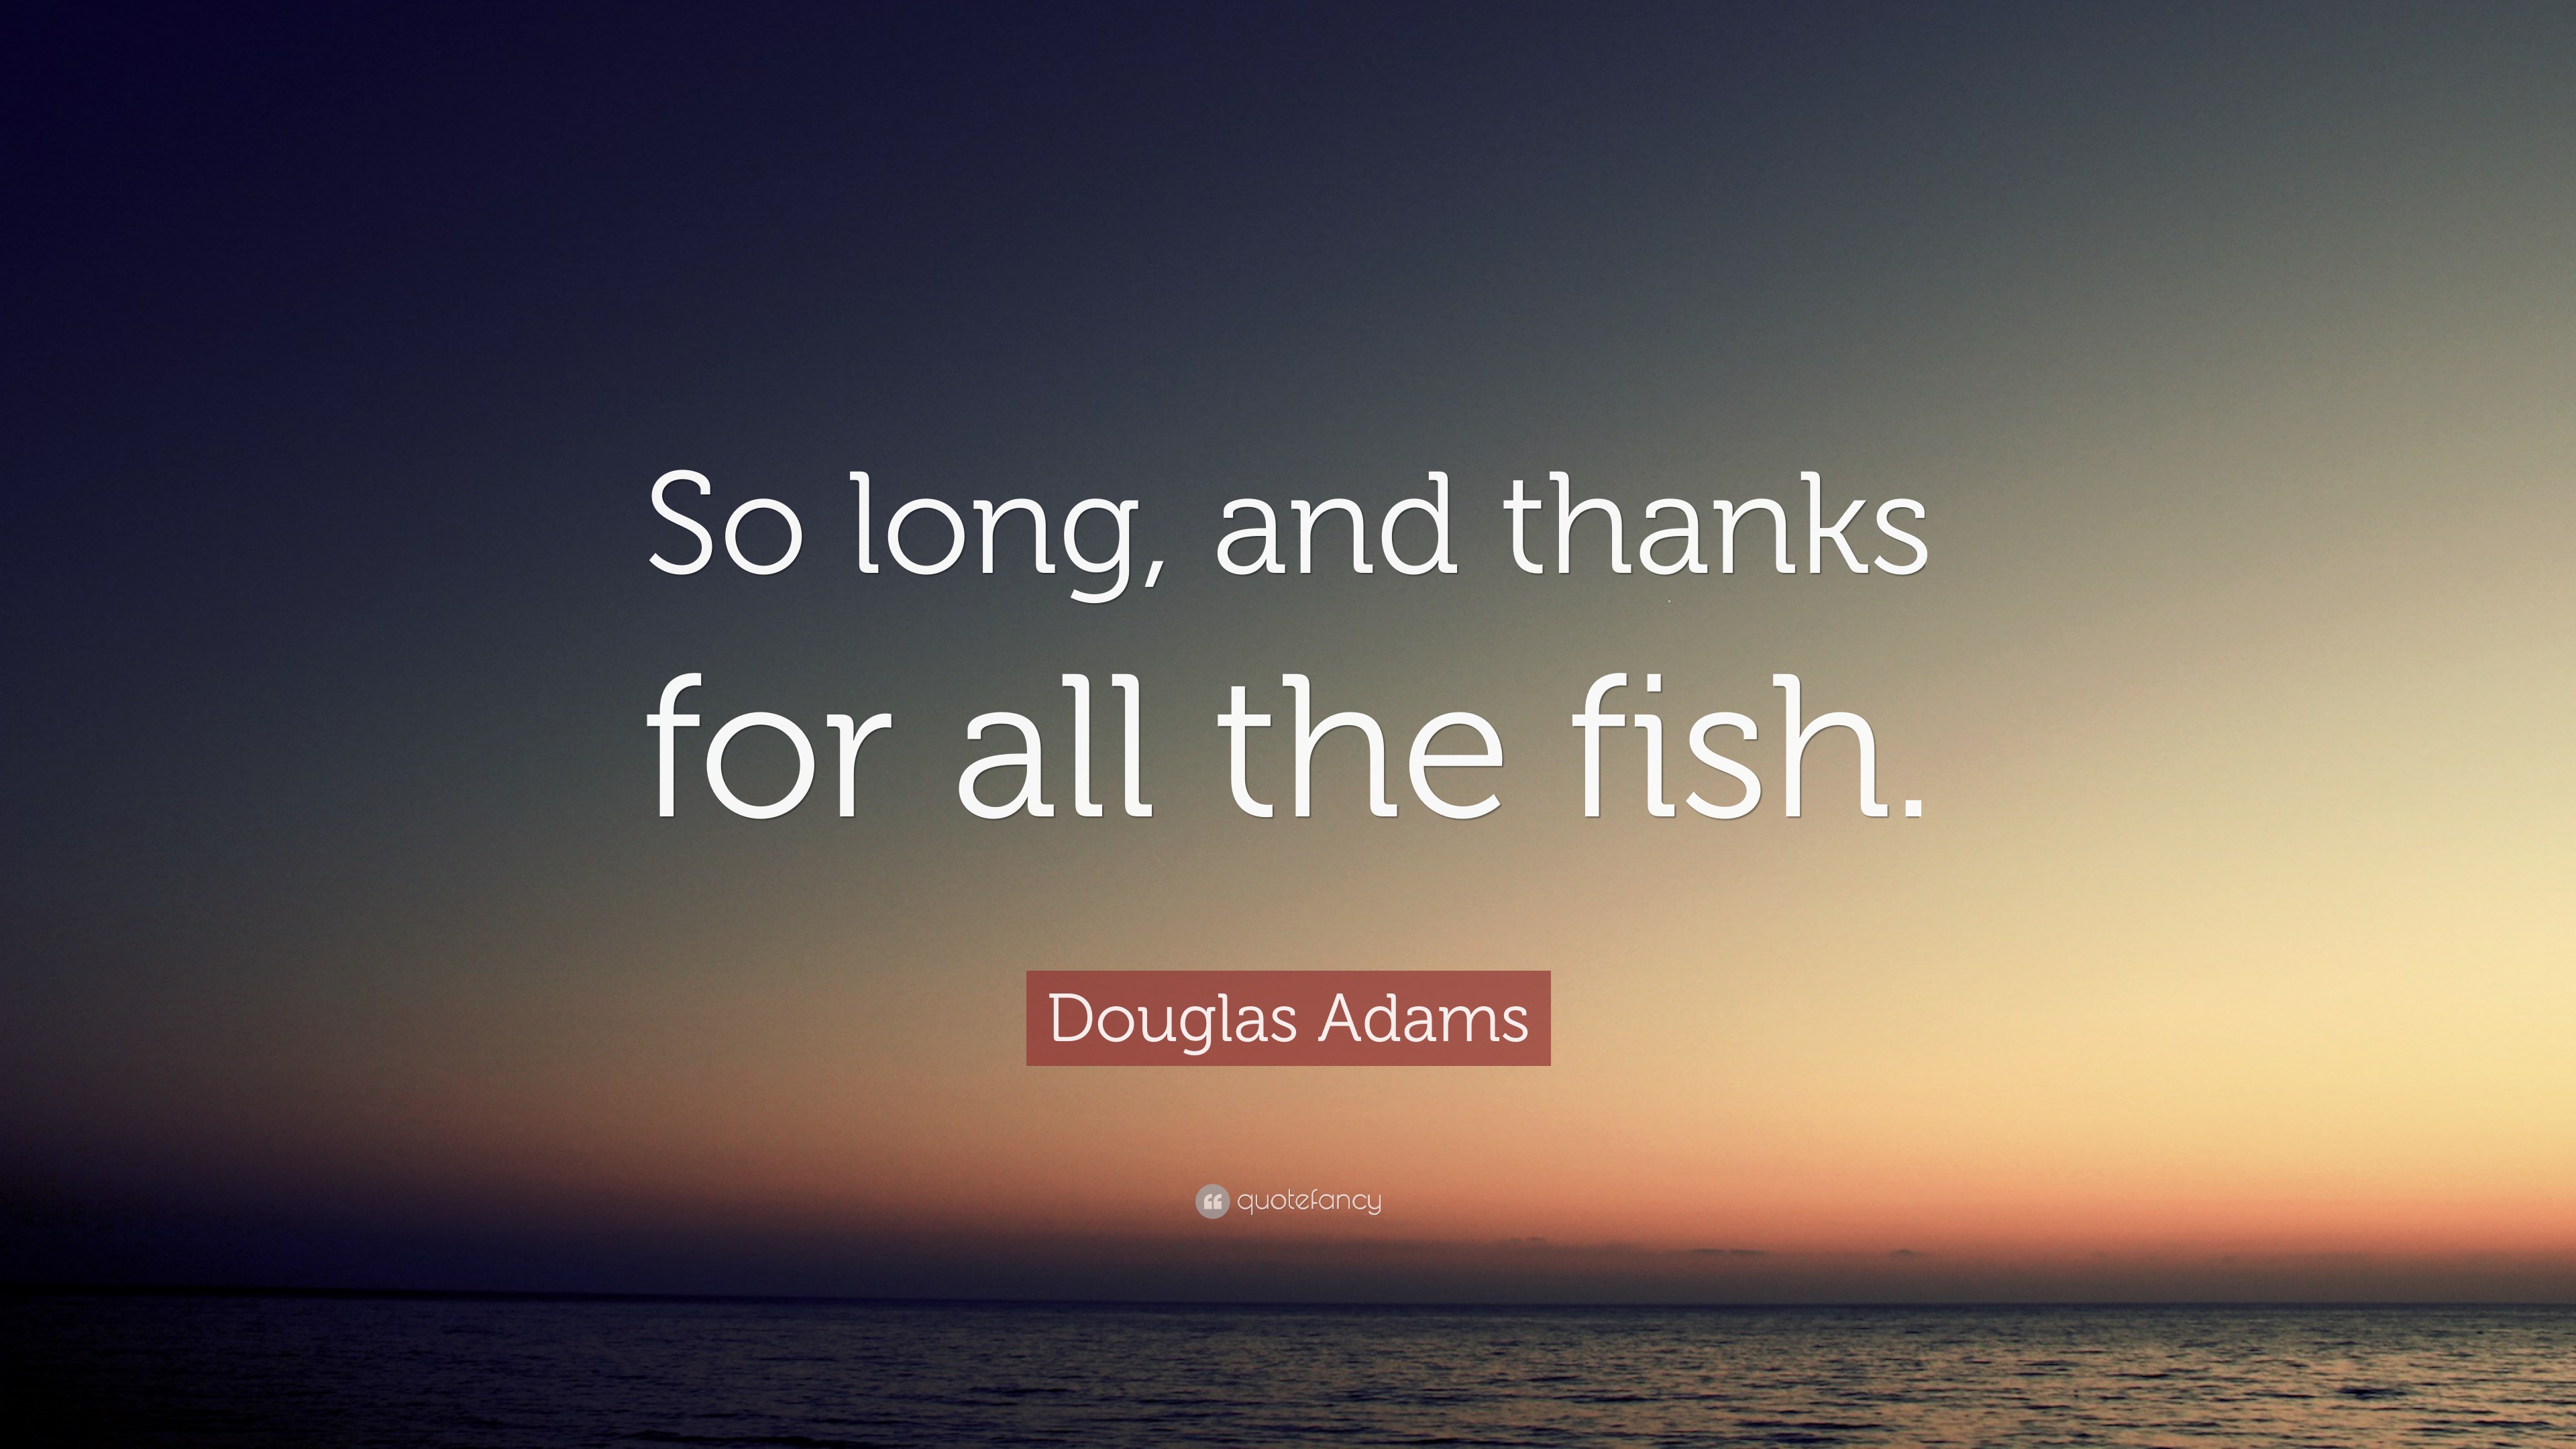 douglas adams goodbye and thanks for all the fish